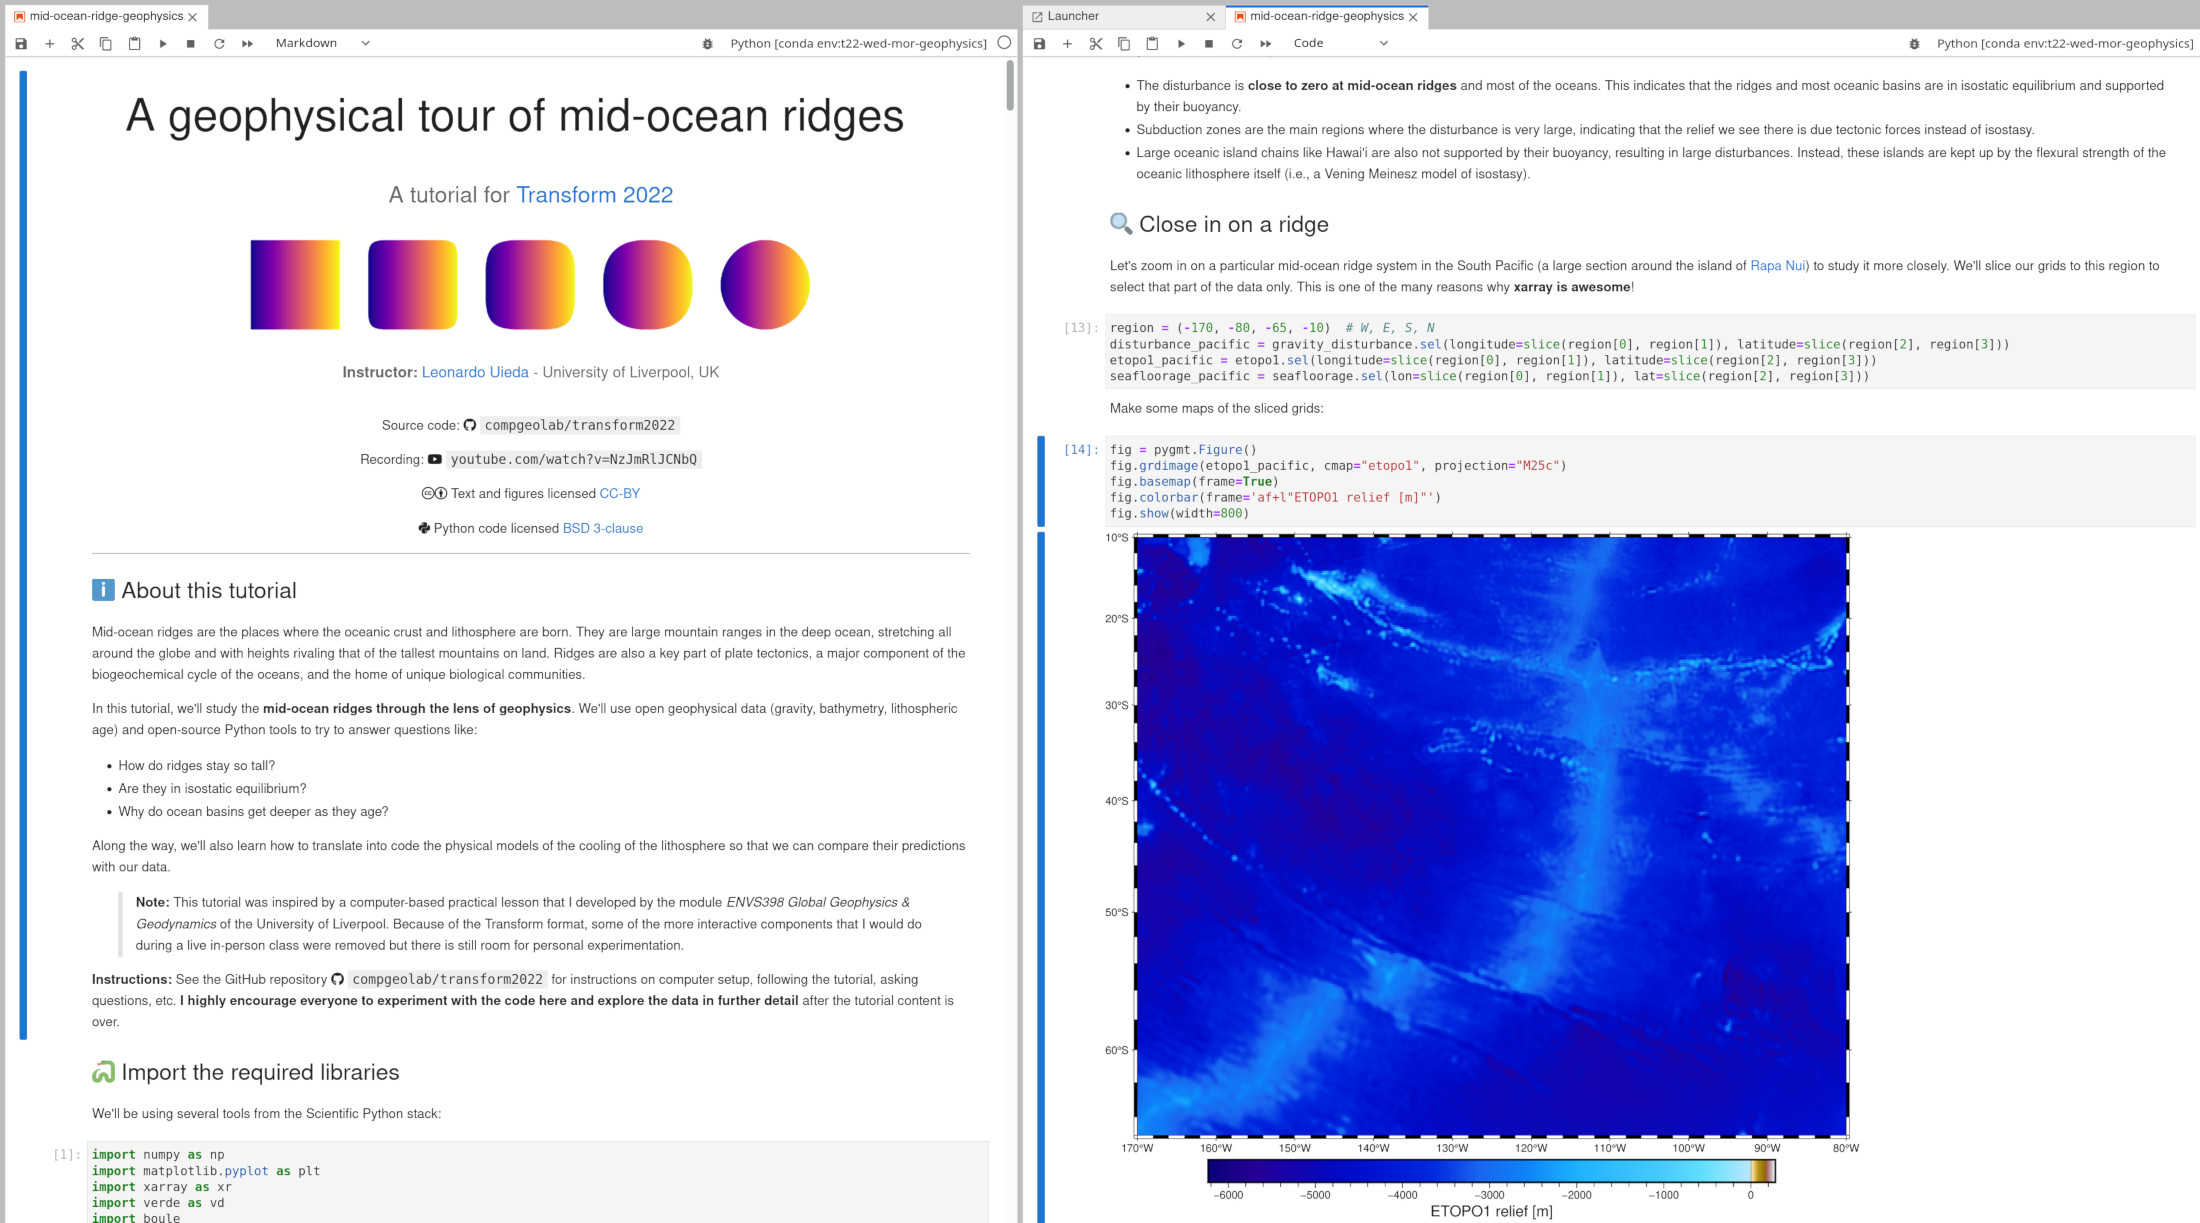 Screenshot of two Jupyter notebooks side by side showing the name of the workshop on the left (title of this post) and some code plotting a map of a mid-ocean ridge on the right.